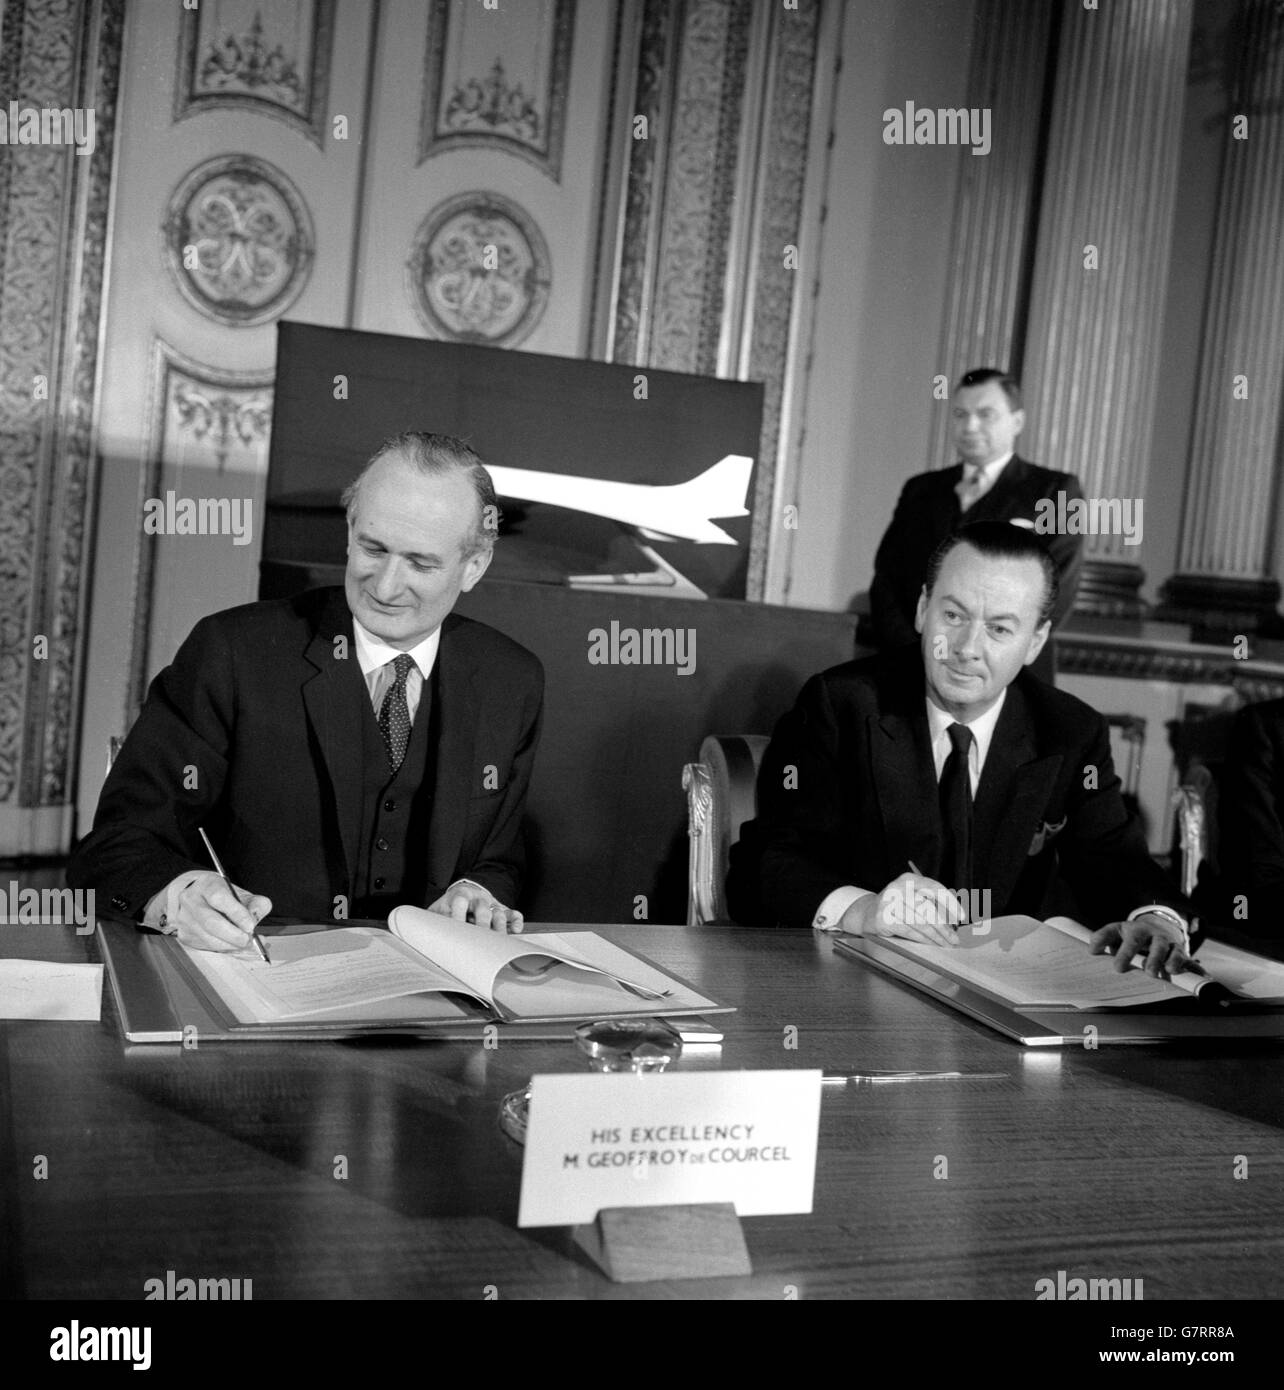 Julian Amery (r), Britain's Minister of Aviation, and Geoffroy Chodron de Courcel, French Ambassador, sign the agreement for the Anglo-French development of a supersonic jet airliner. The ceremony took place at Lancaster House, London. The new aircraft, designed to cruise at 1,450mph and to carry 100 passengers, will be built by the British Aircraft Corporation and Sud Aviation of France. It is expected to enter service in or about 1970. Stock Photo